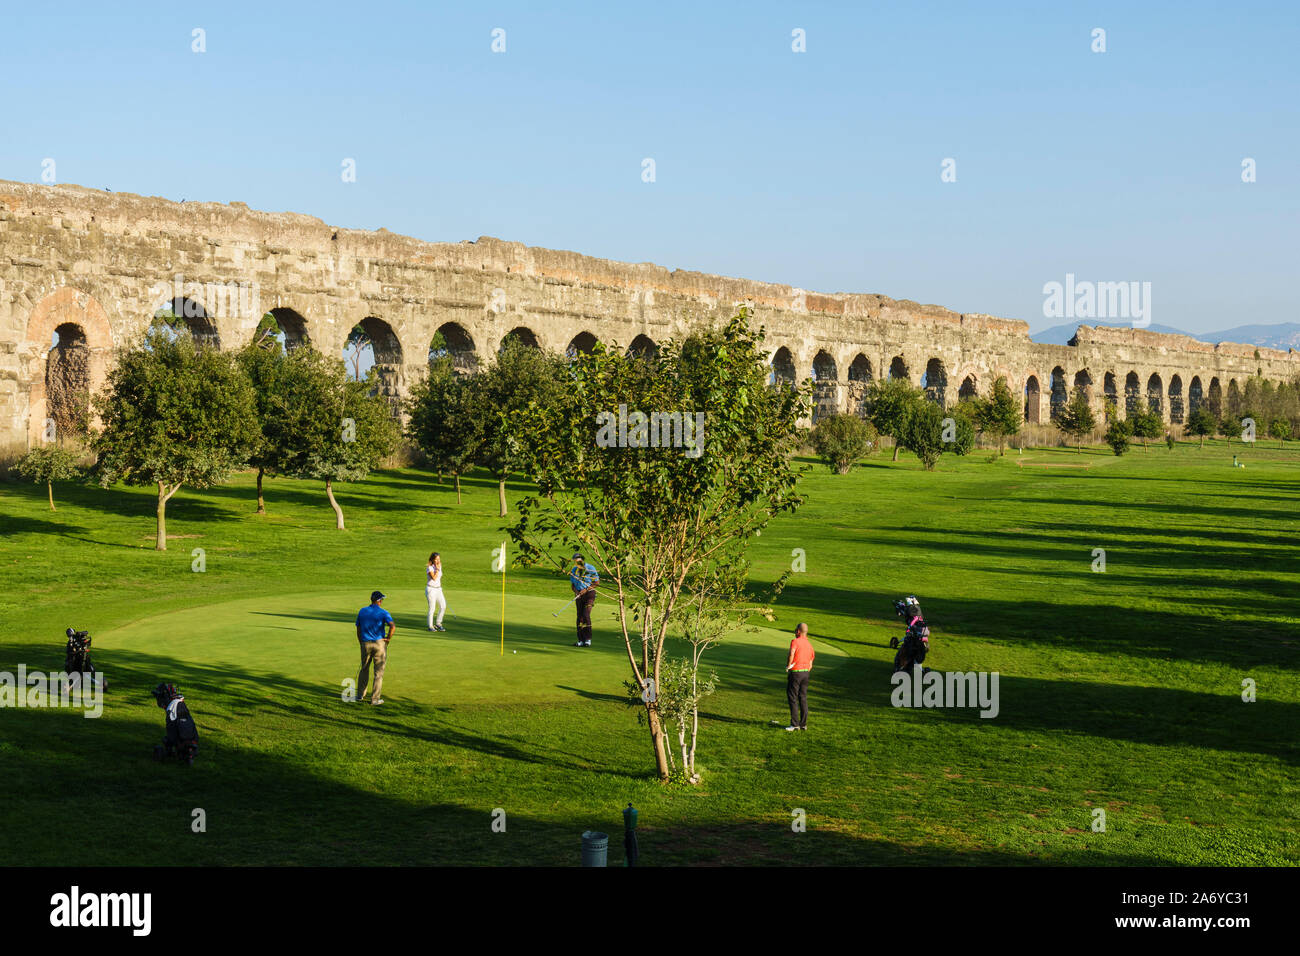 Rome. Italy. Parco degli Acquedotti, playing golf against the backdrop of the ancient Roman aqueduct Aqua Claudia, begun by Emperor Caligula in 38 AD Stock Photo